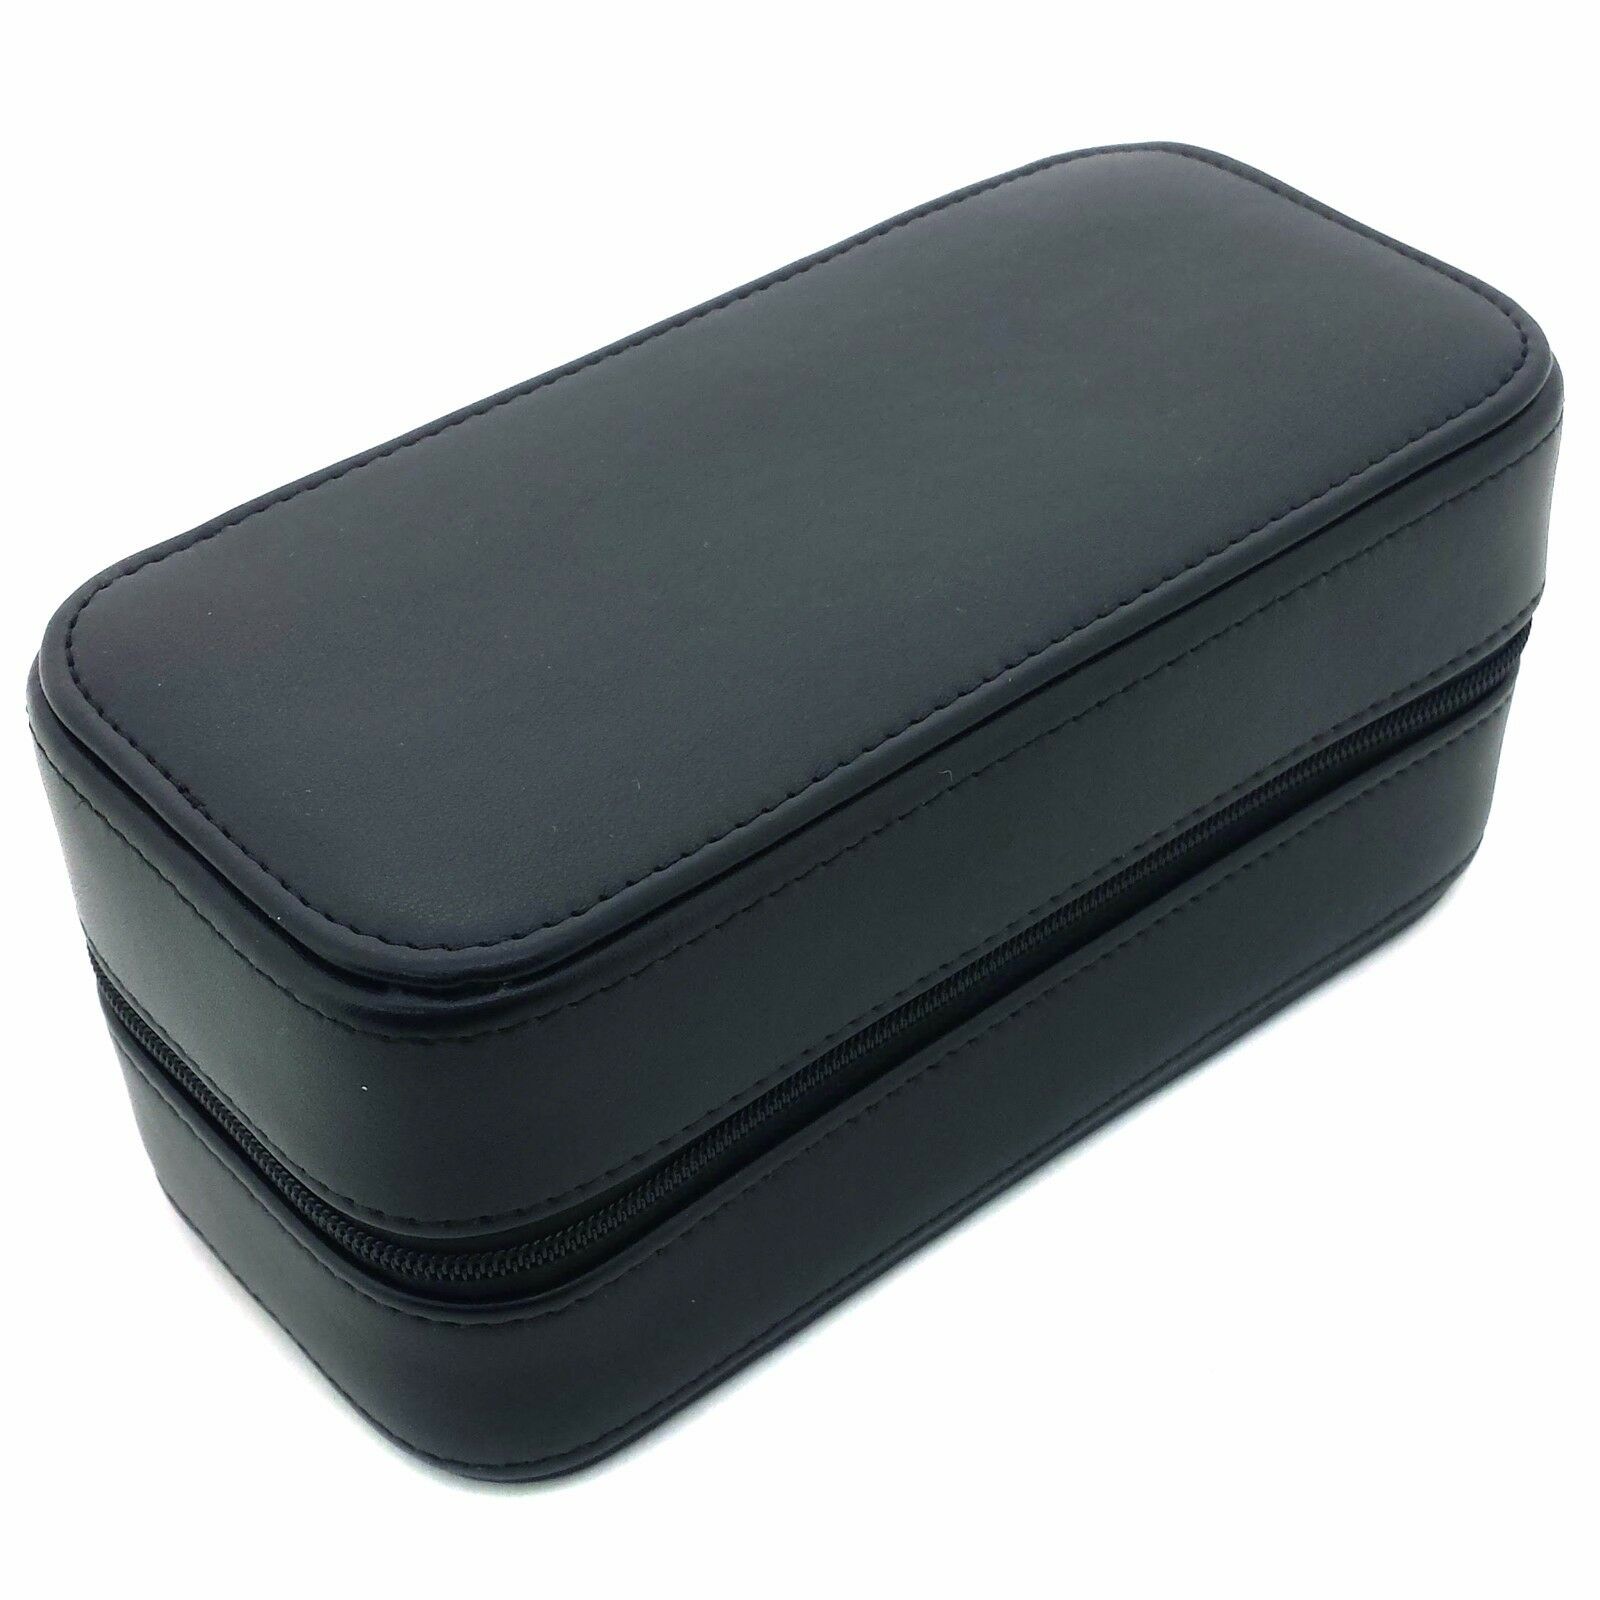 Watch Case Compact for 2 Watches Storage Protection Zipper Travel in Black or Brown - image 3 of 3